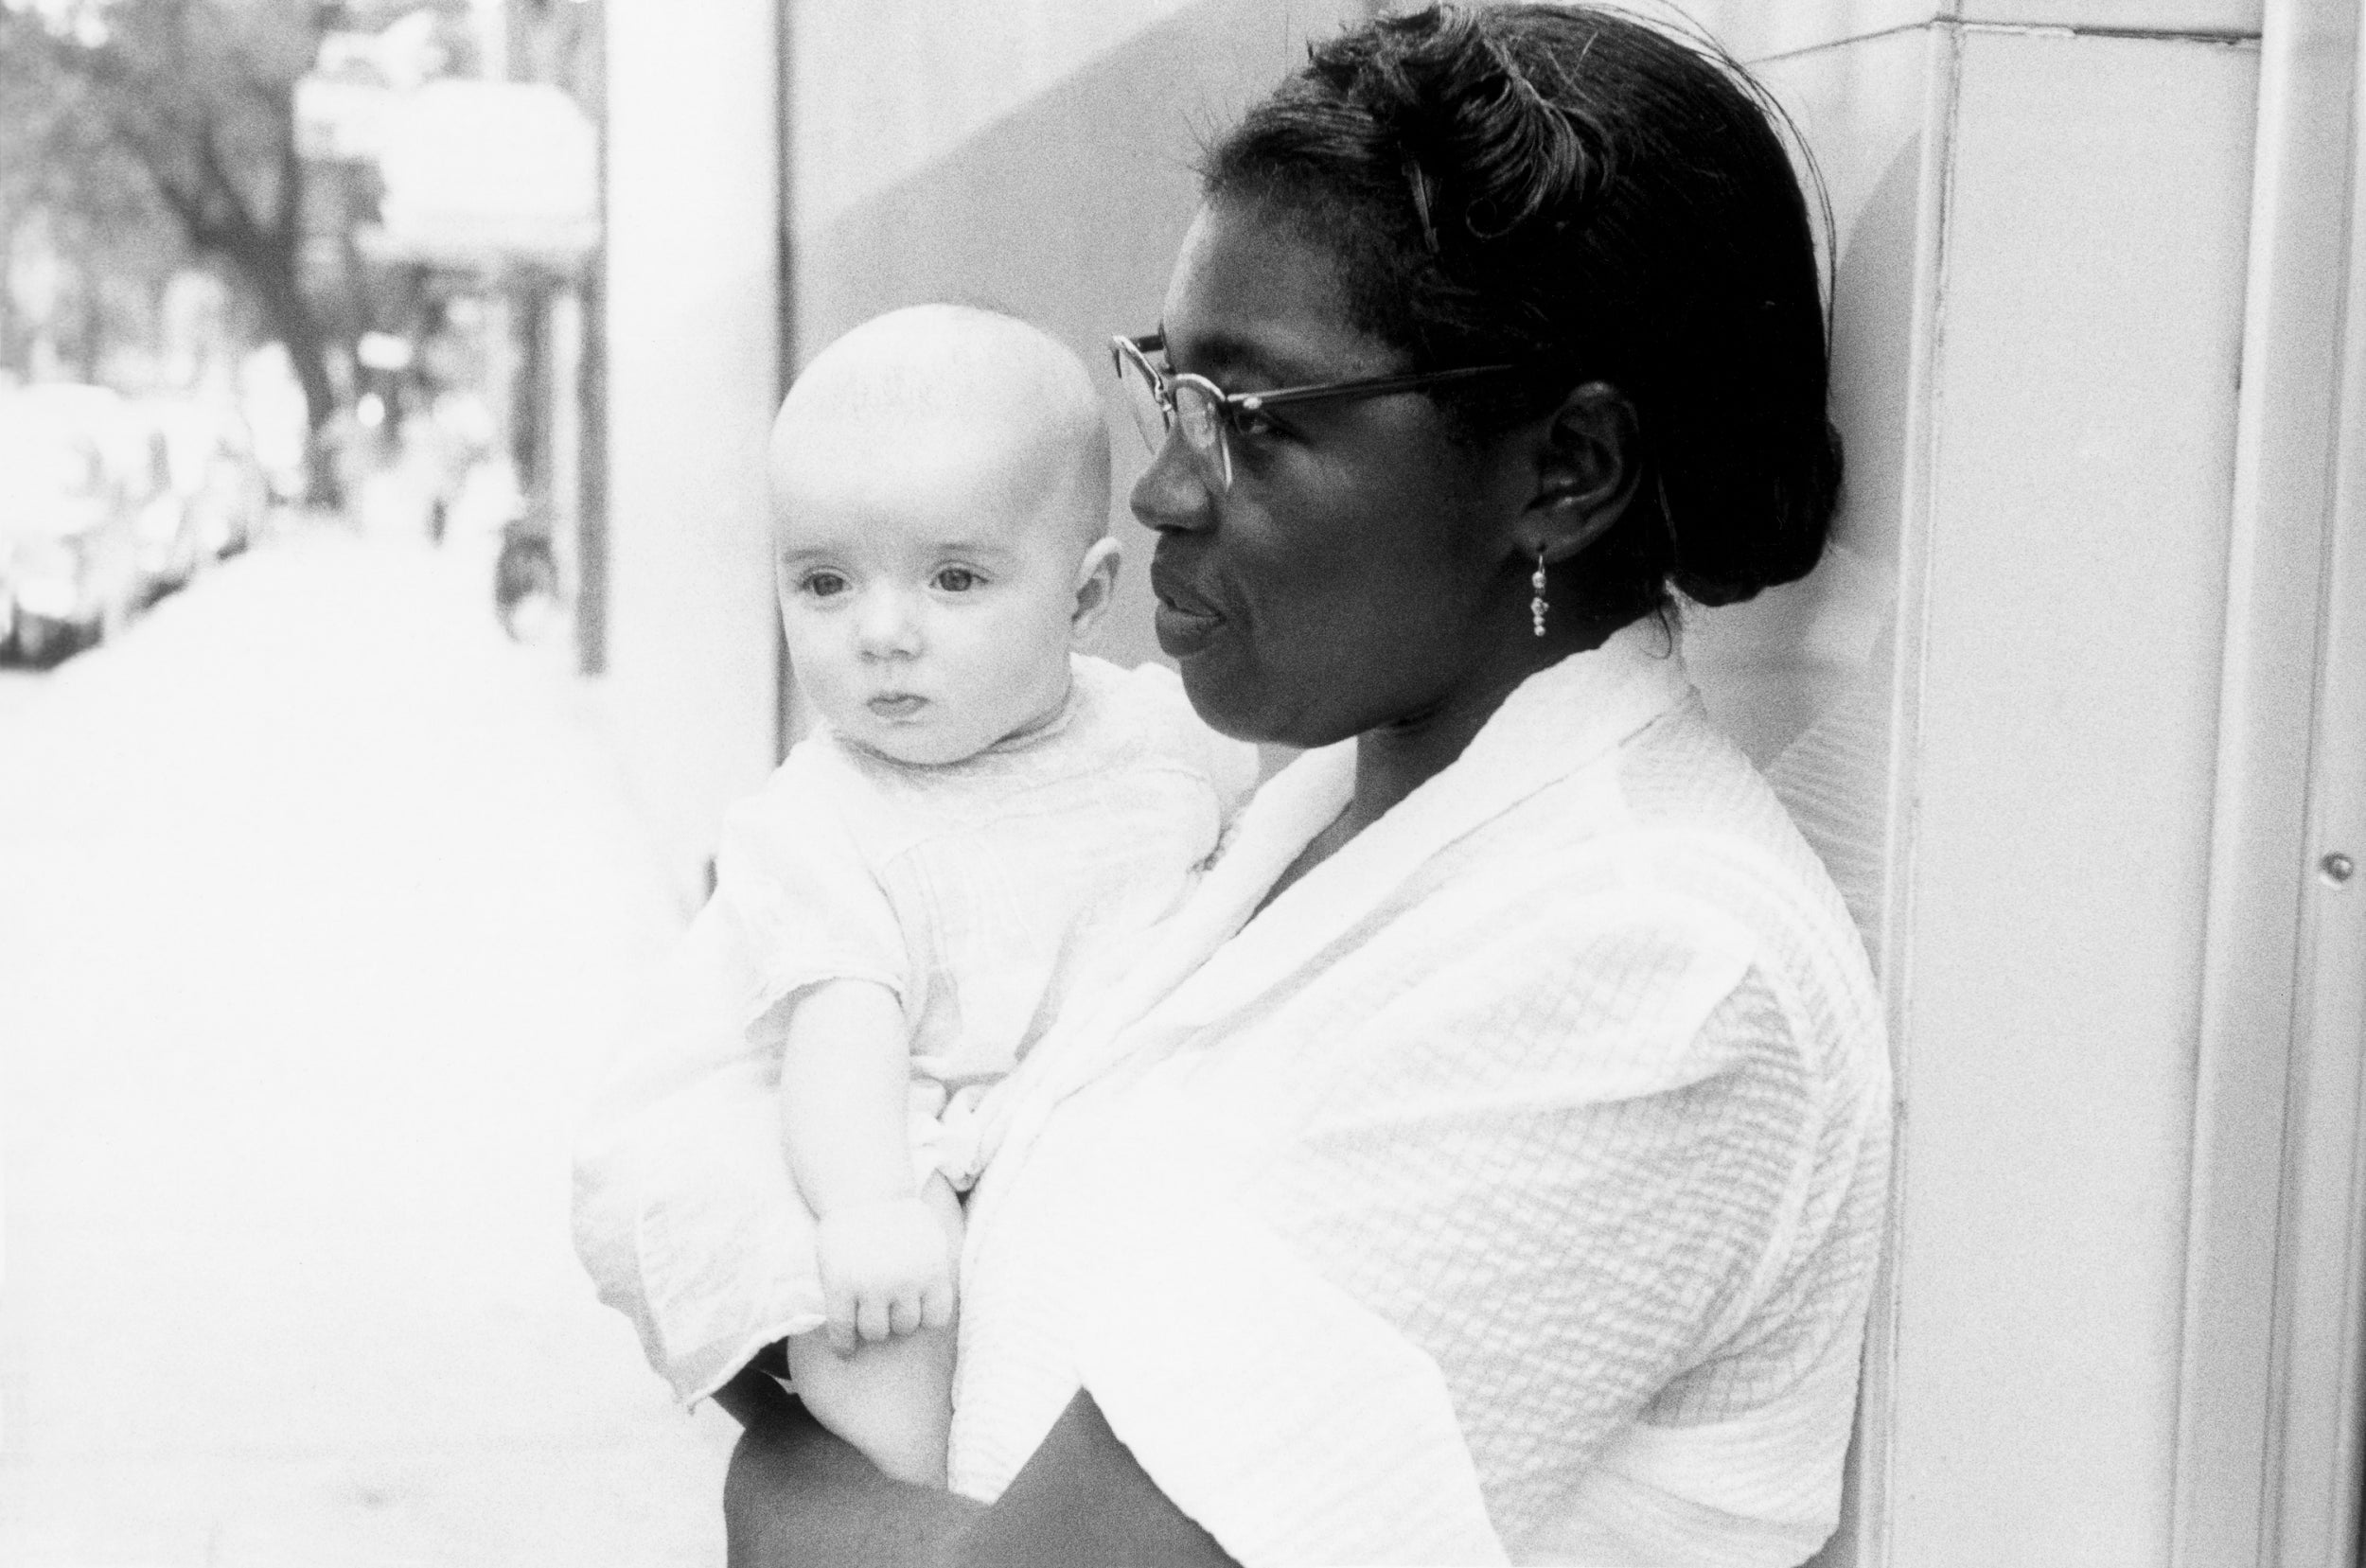 &#13;
Portrait of a woman and baby in ‘The Americans’ (Robert Frank, courtesy Pace/MacGill)&#13;